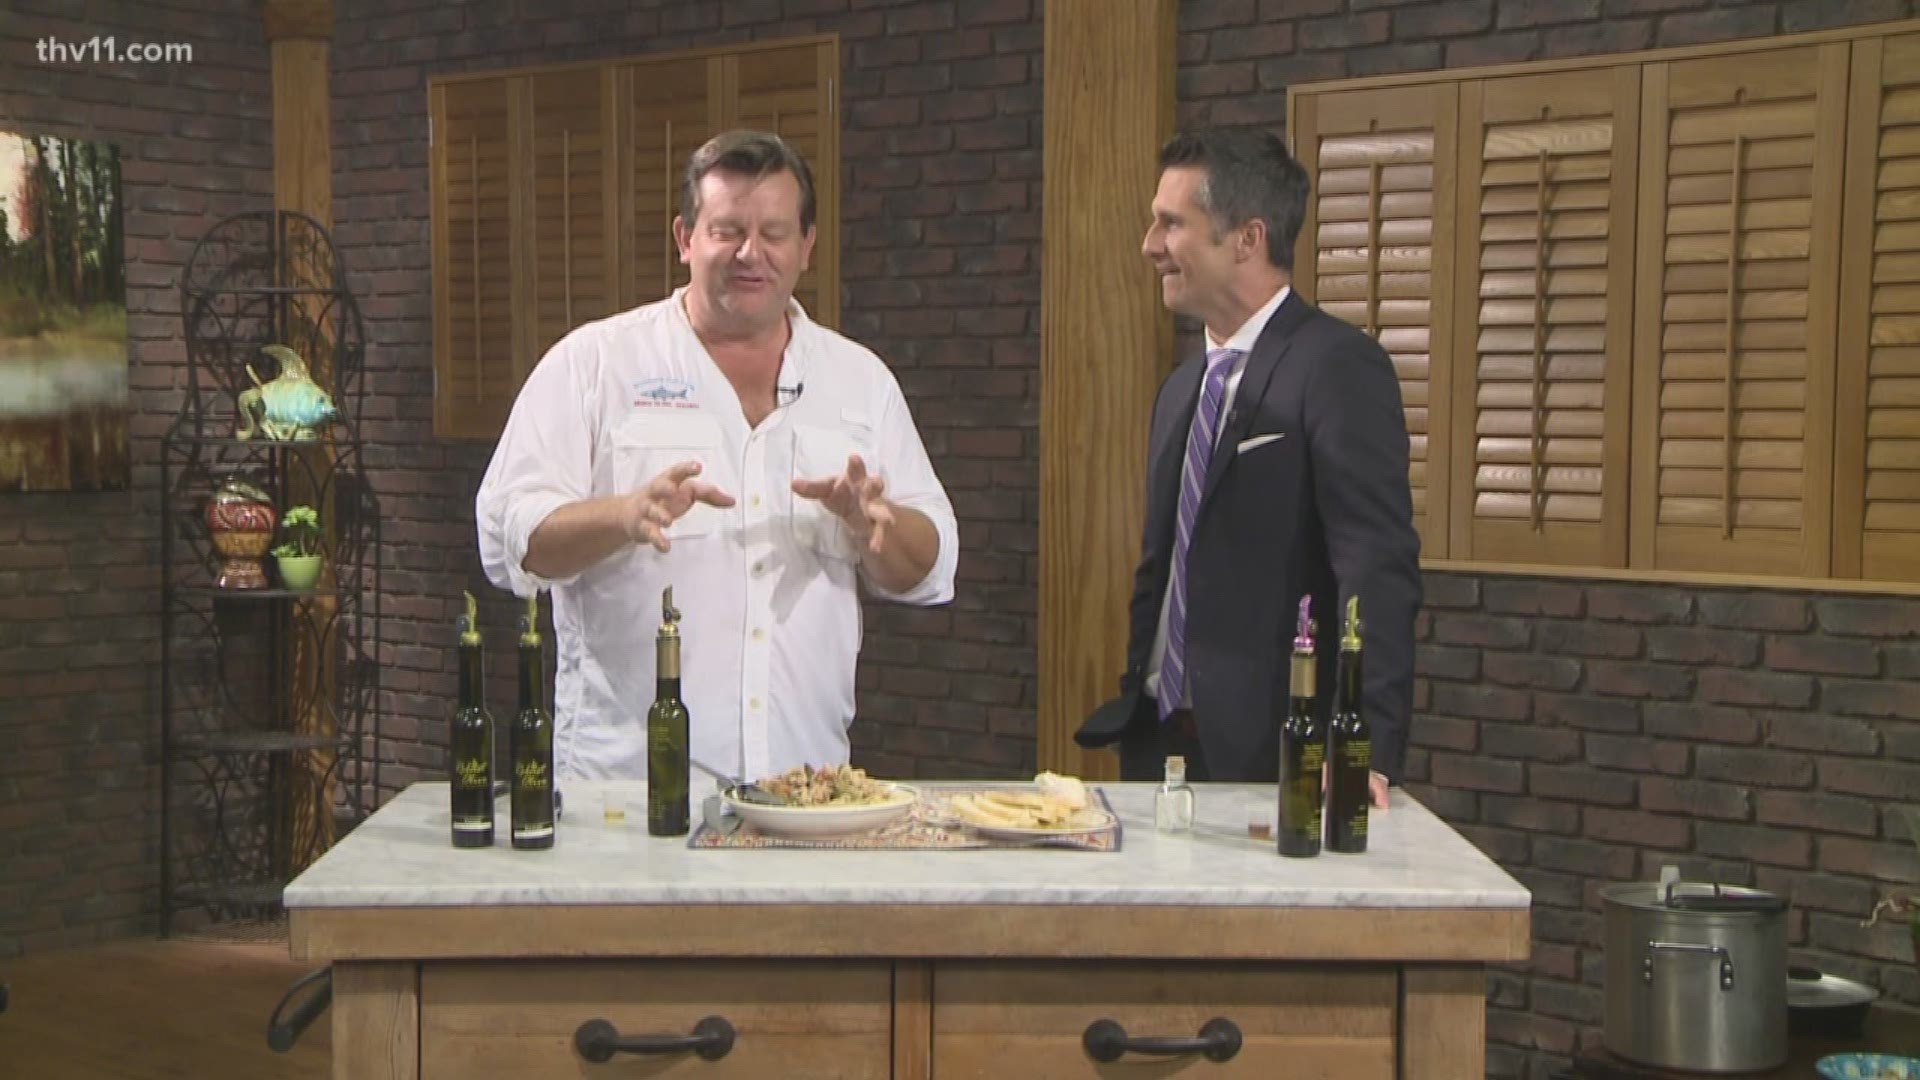 Chef Anthony Michael shows us how to use heart-healthy olive oil to add flavor to dishes.